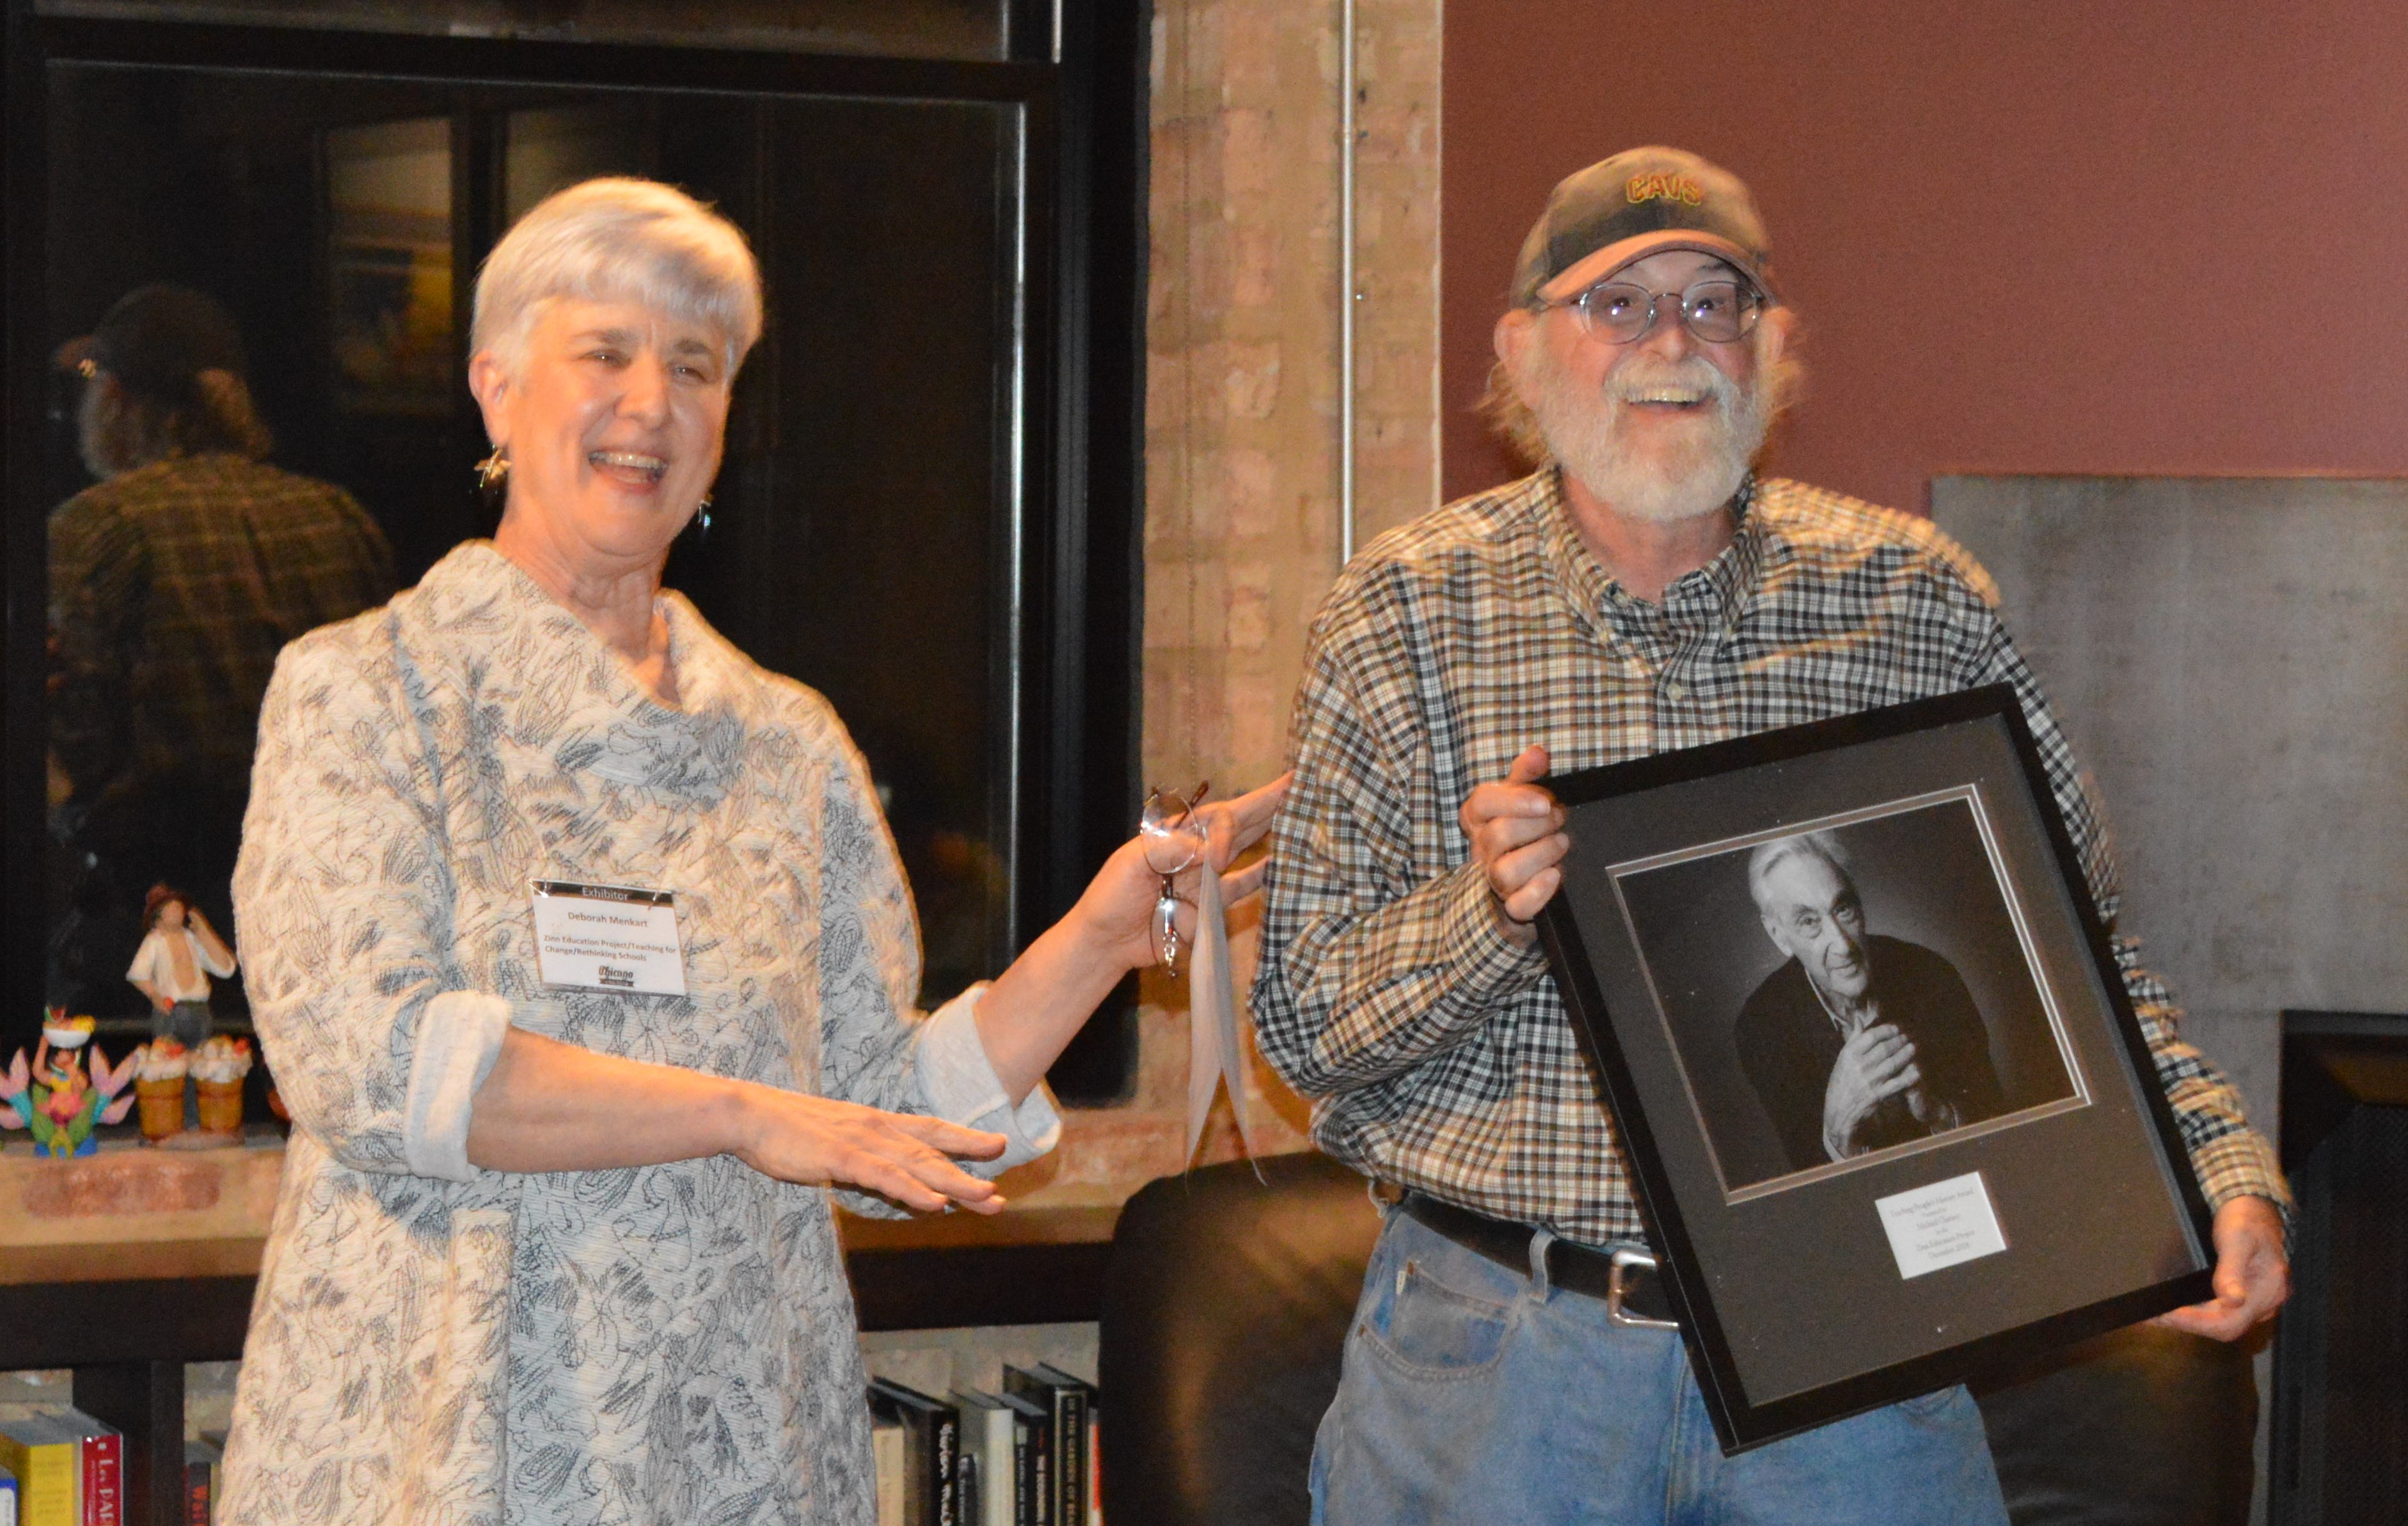 Menkart and Charney with Award (Photo) | Zinn Education Project